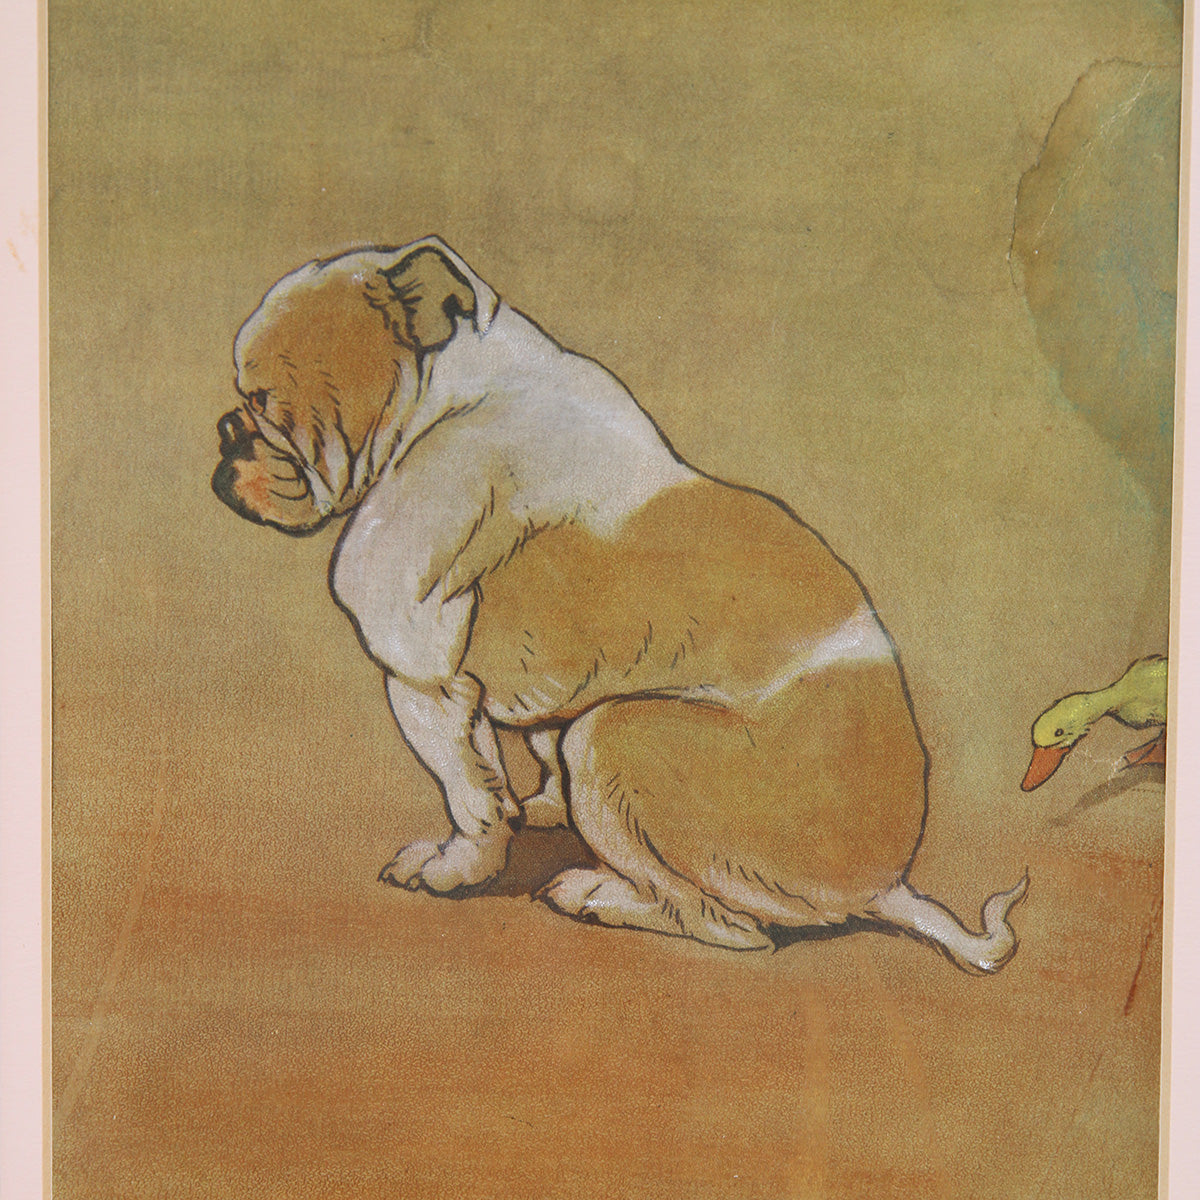 Load image into Gallery viewer, Is It a Worm? Bulldog Print, c.1930s - SOLD
